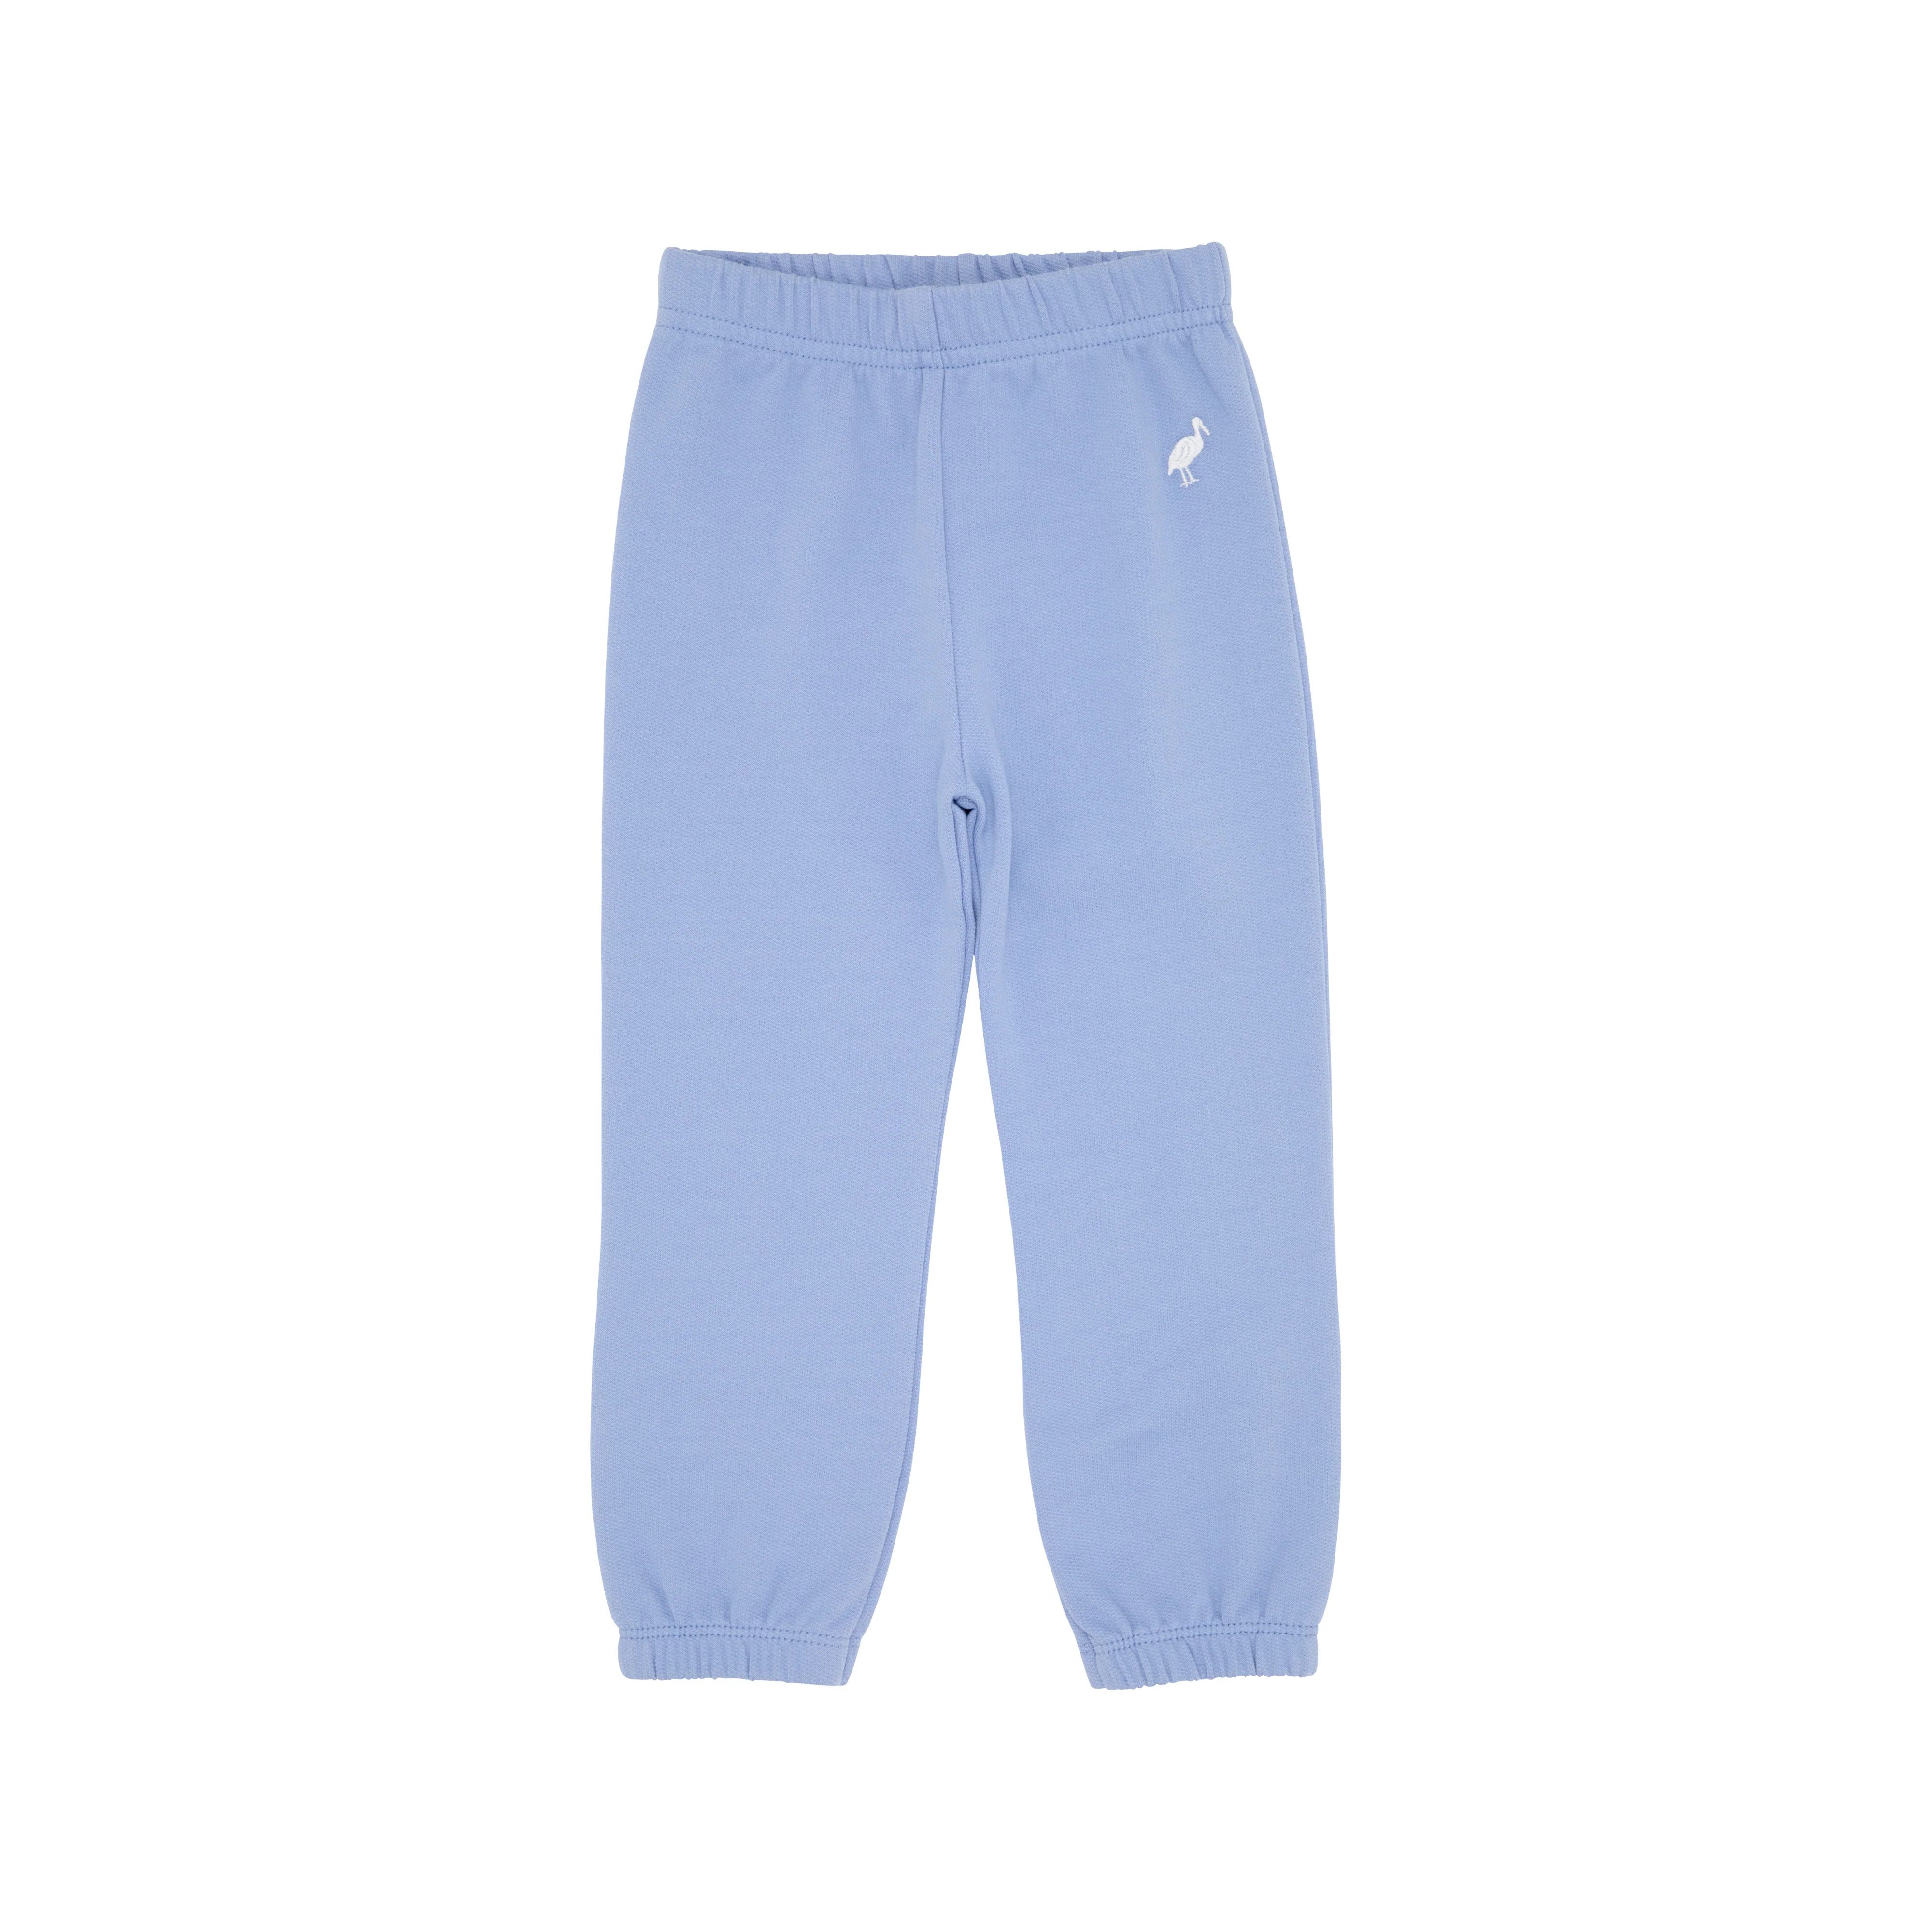 Gates Sweeney Sweatpants - Park City Periwinkle with Worth Avenue White Stork | The Beaufort Bonnet Company